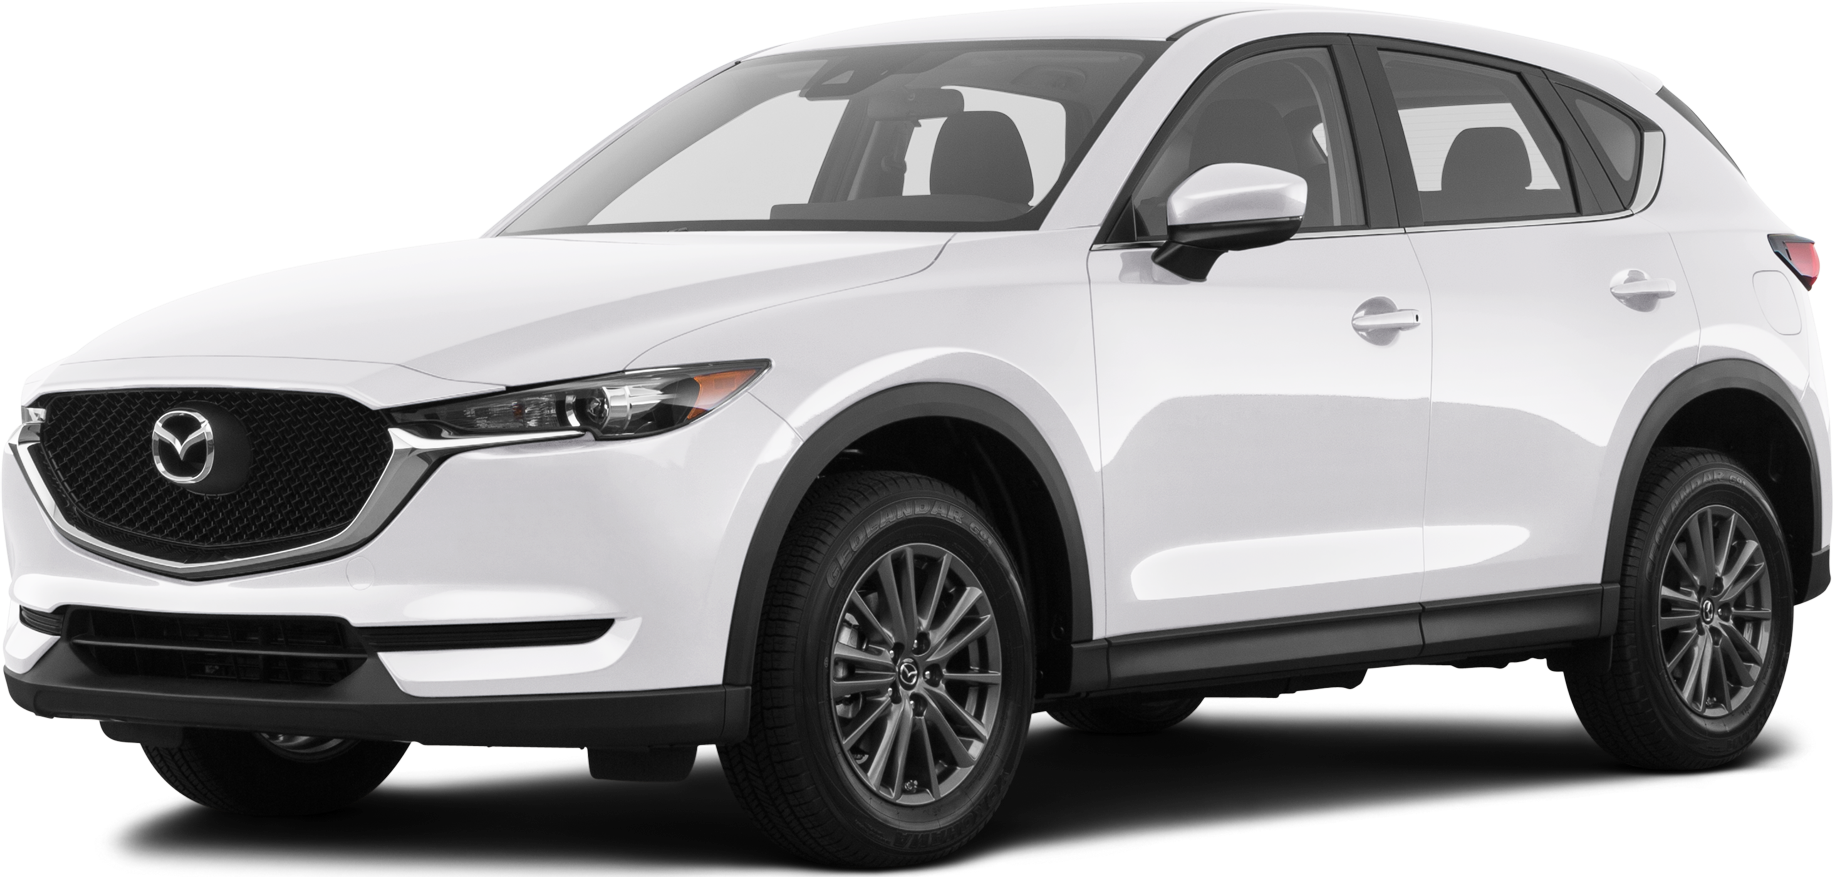 2017 Mazda Cx 5 Price Value Ratings And Reviews Kelley Blue Book